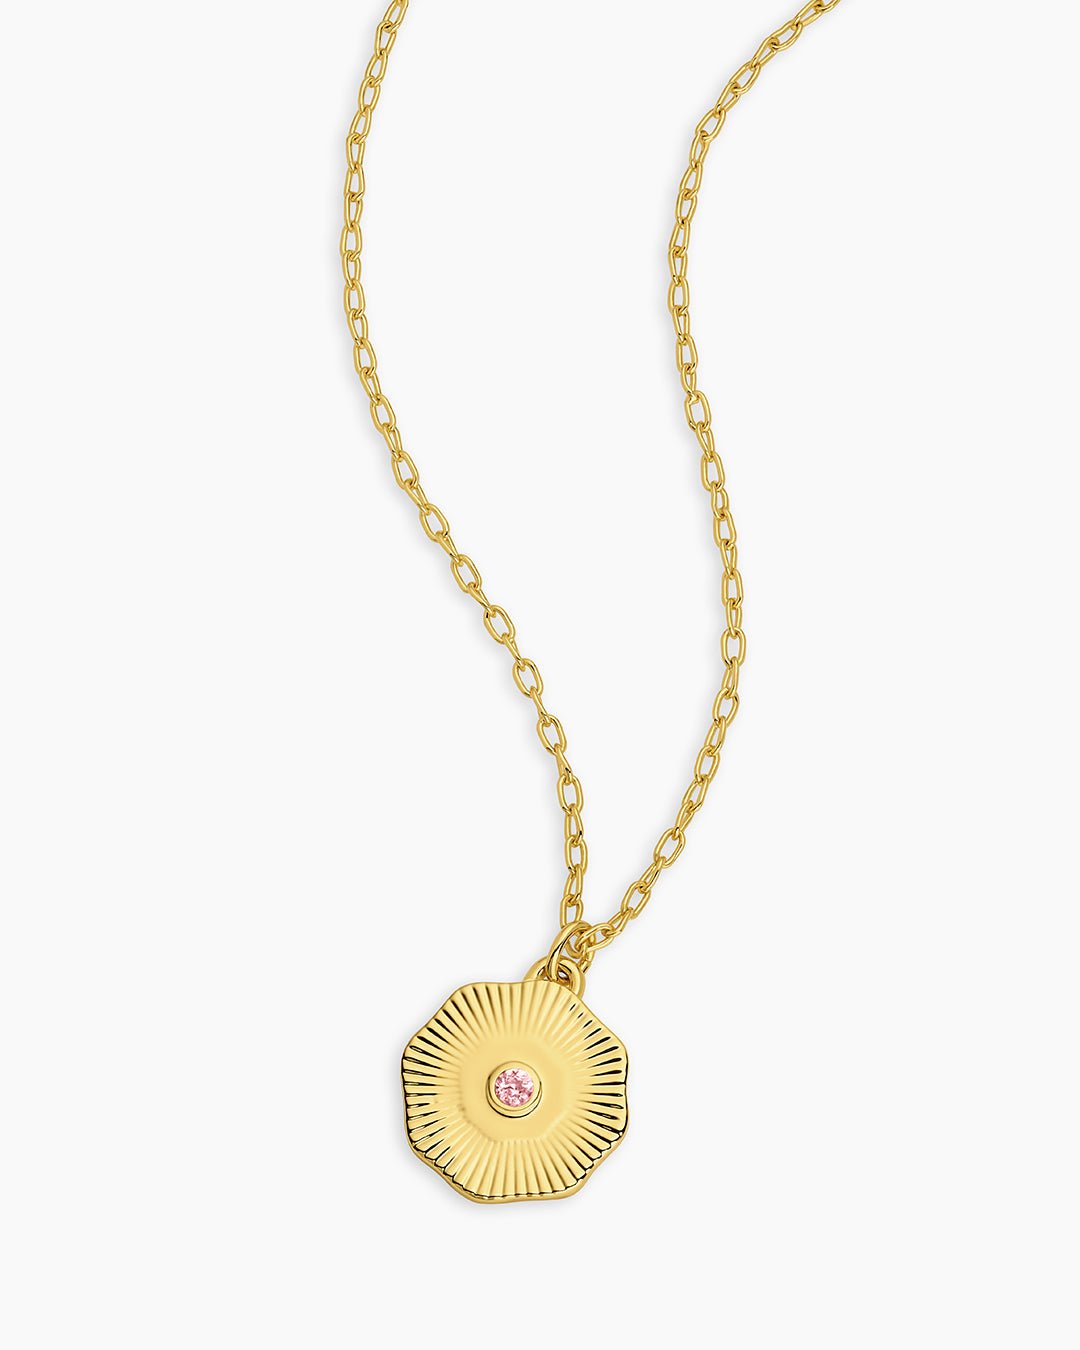 Birthstone Coin Necklace || option::Gold Plated, Pink Tourmaline - October